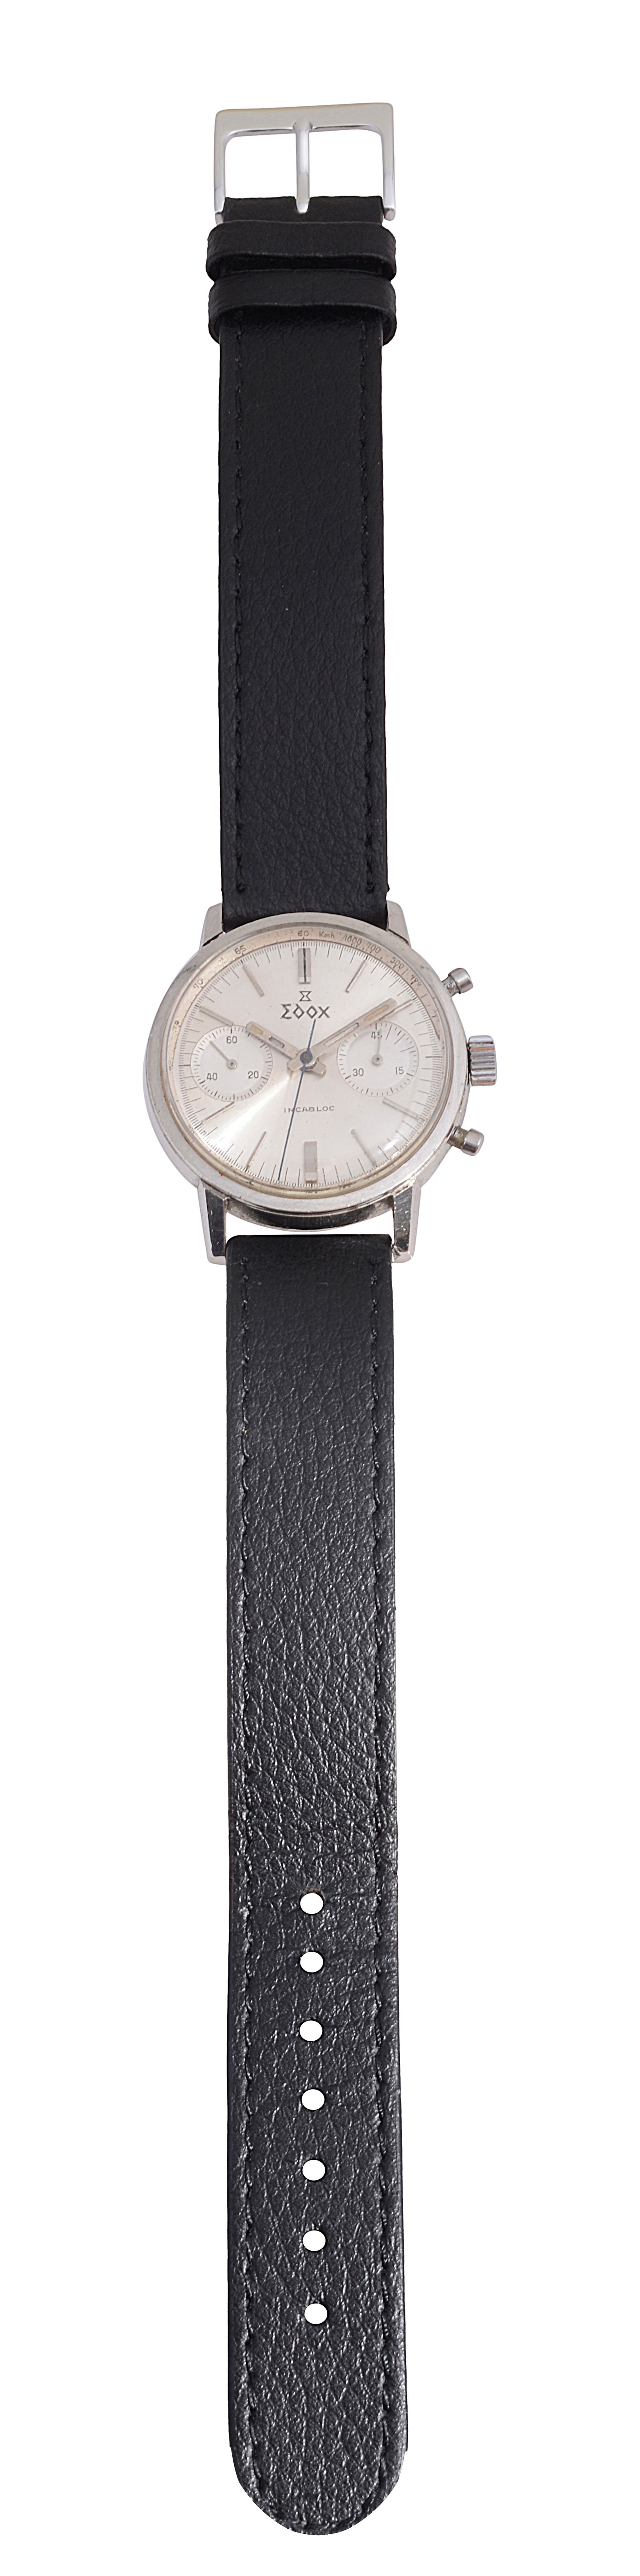 A gentleman's 1960s' Edox stainless steel chronograph wristwatch - Image 2 of 5